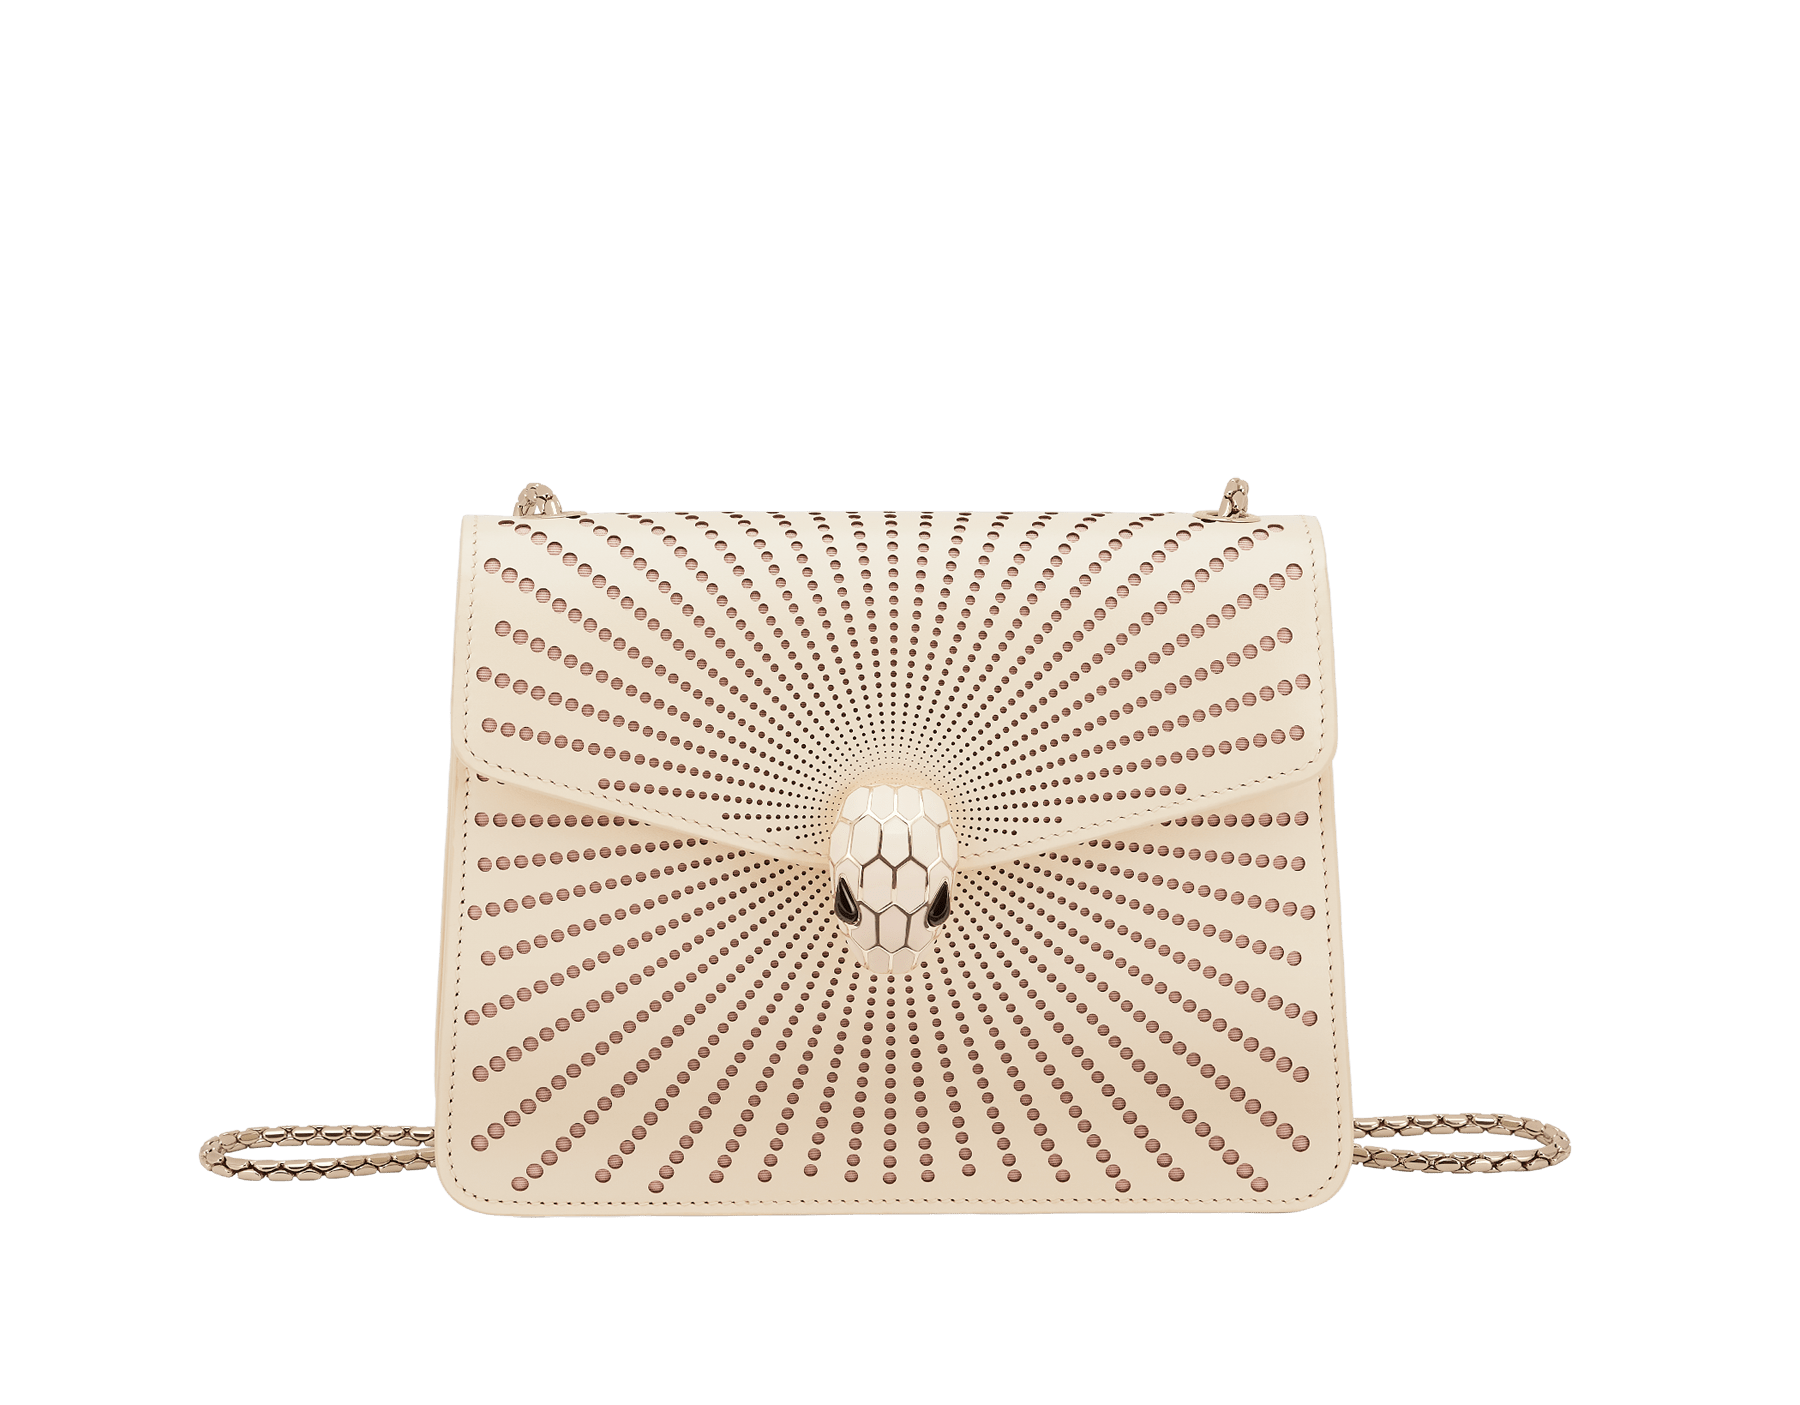 Serpenti Forever crossbody bag in ivory opal laser-cut calf leather with caramel topaz beige nappa leather lining. Captivating snakehead closure in light gold-plated brass embellished with matt and shiny ivory opal enamel scales and black onyx eyes. 422-LCL image 1